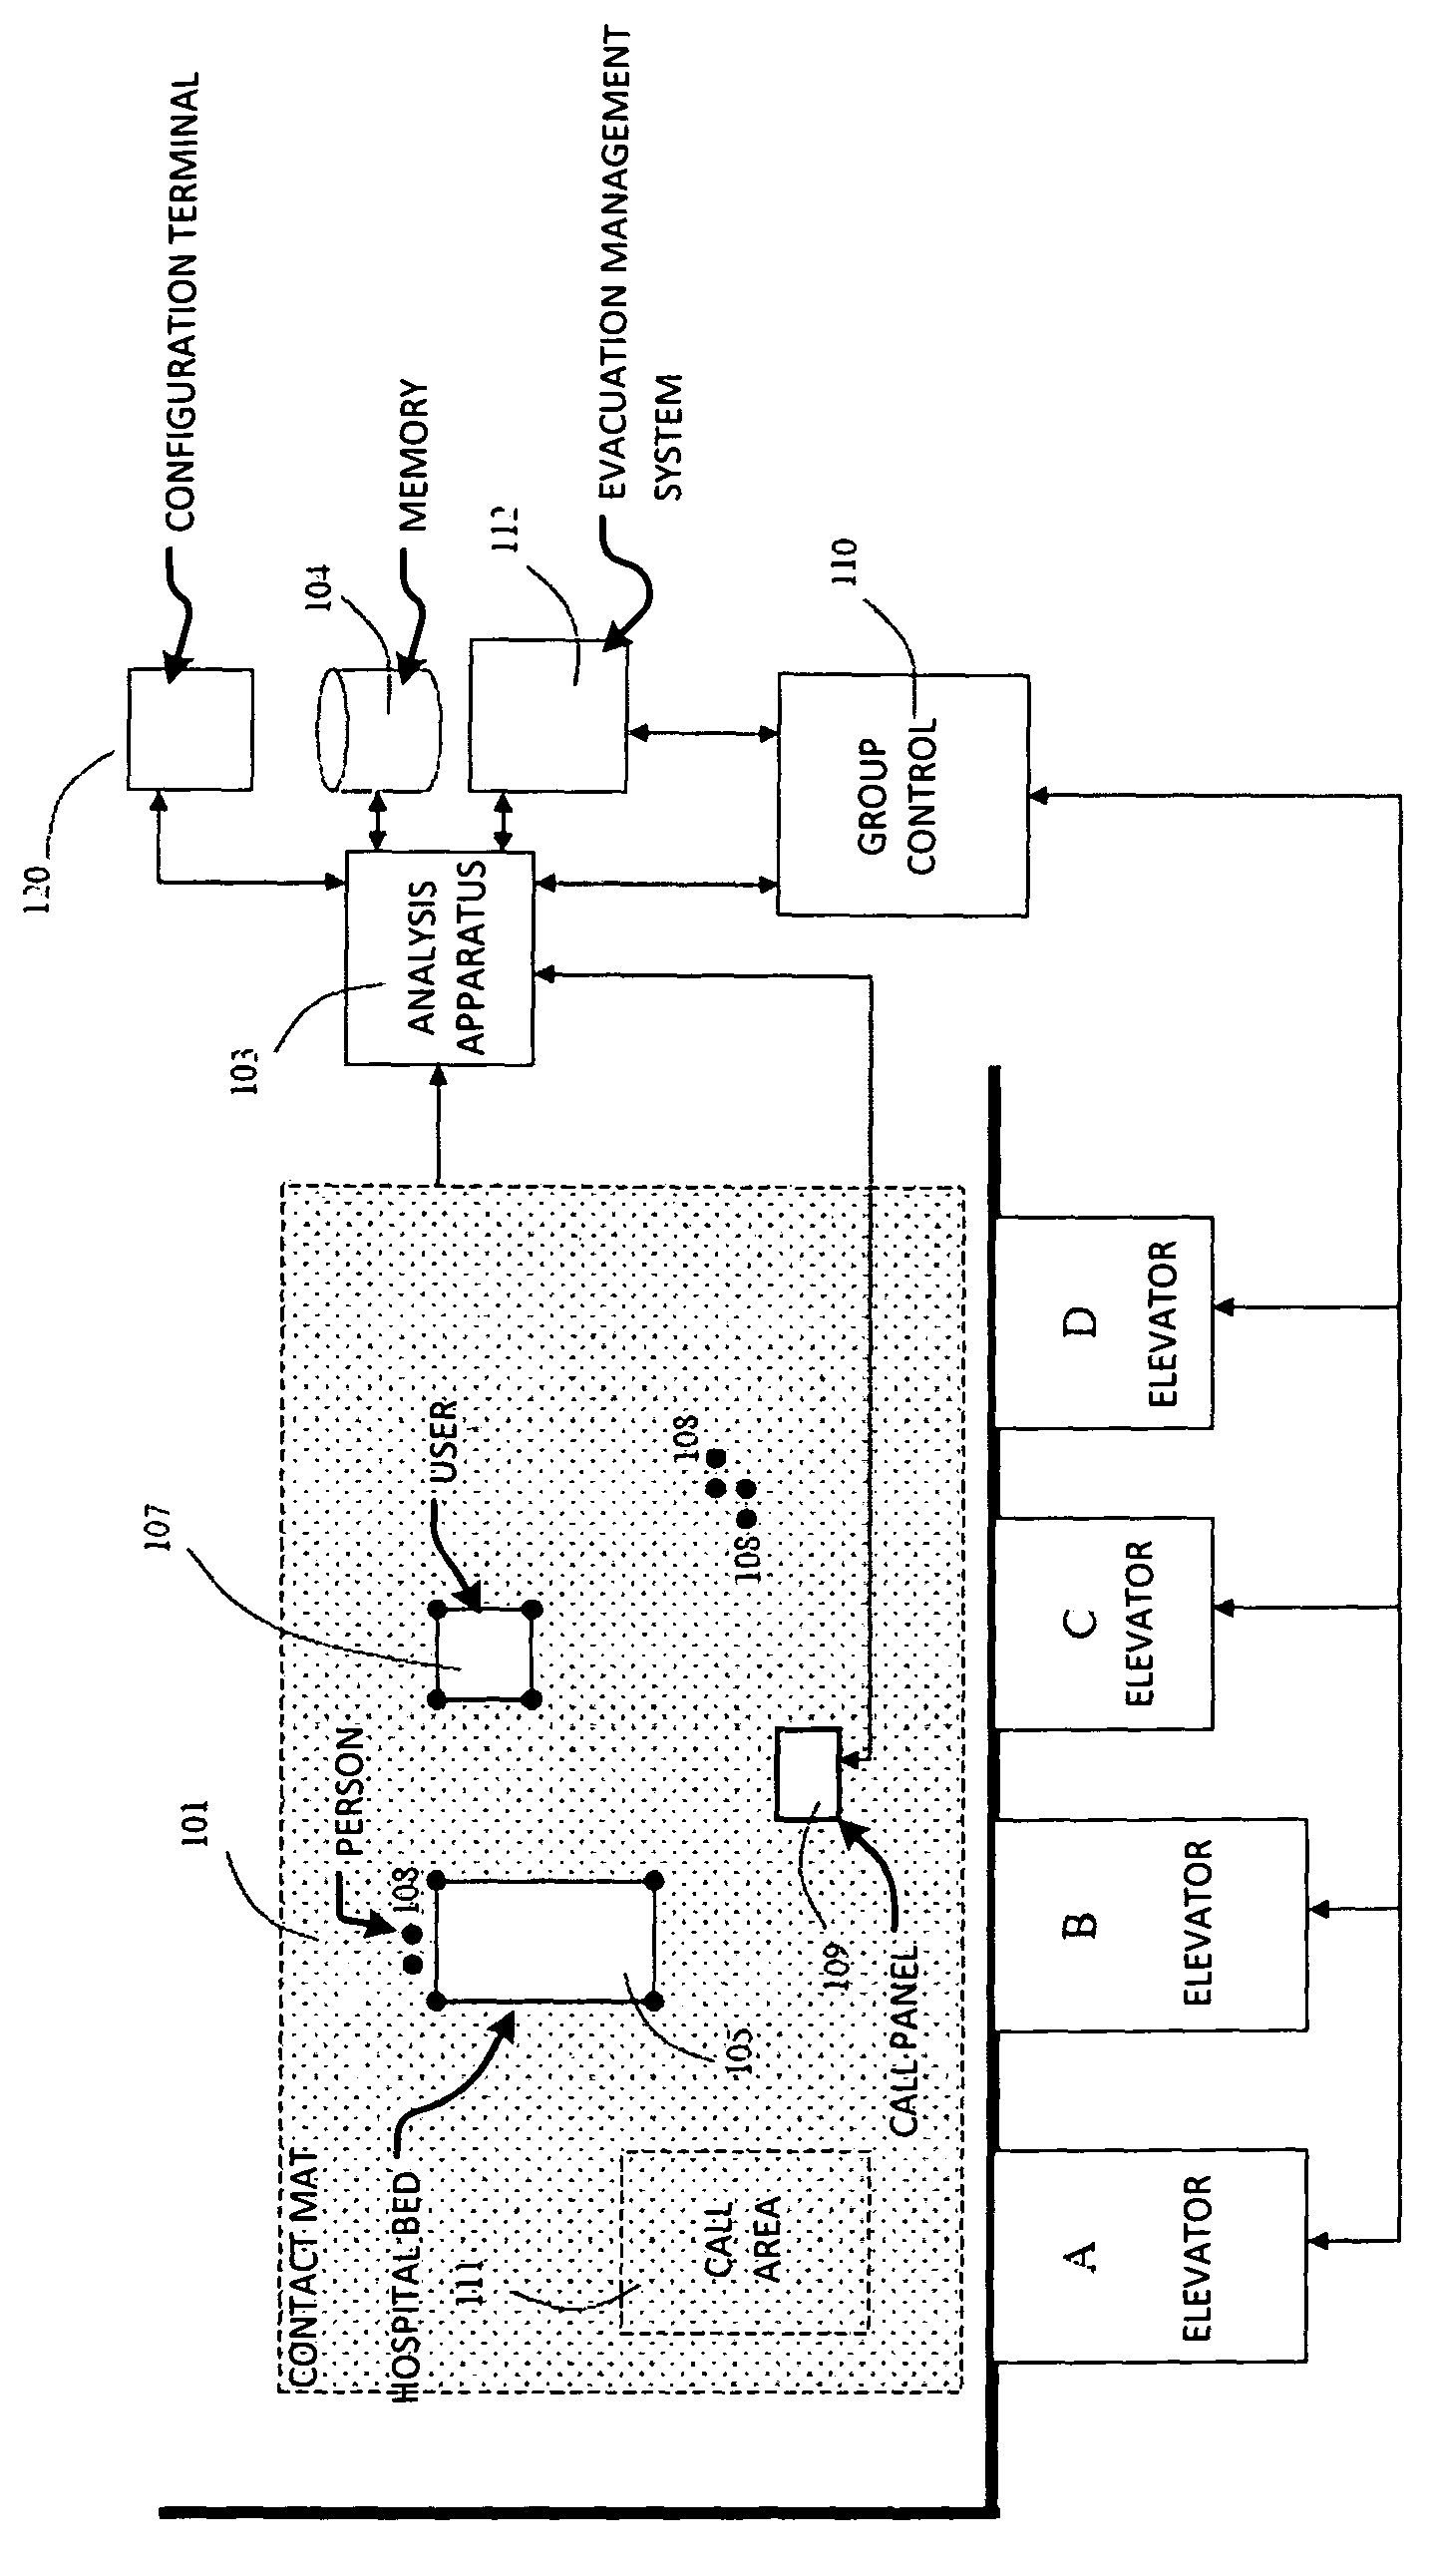 Elevator systems and methods to control elevator based on contact patterns